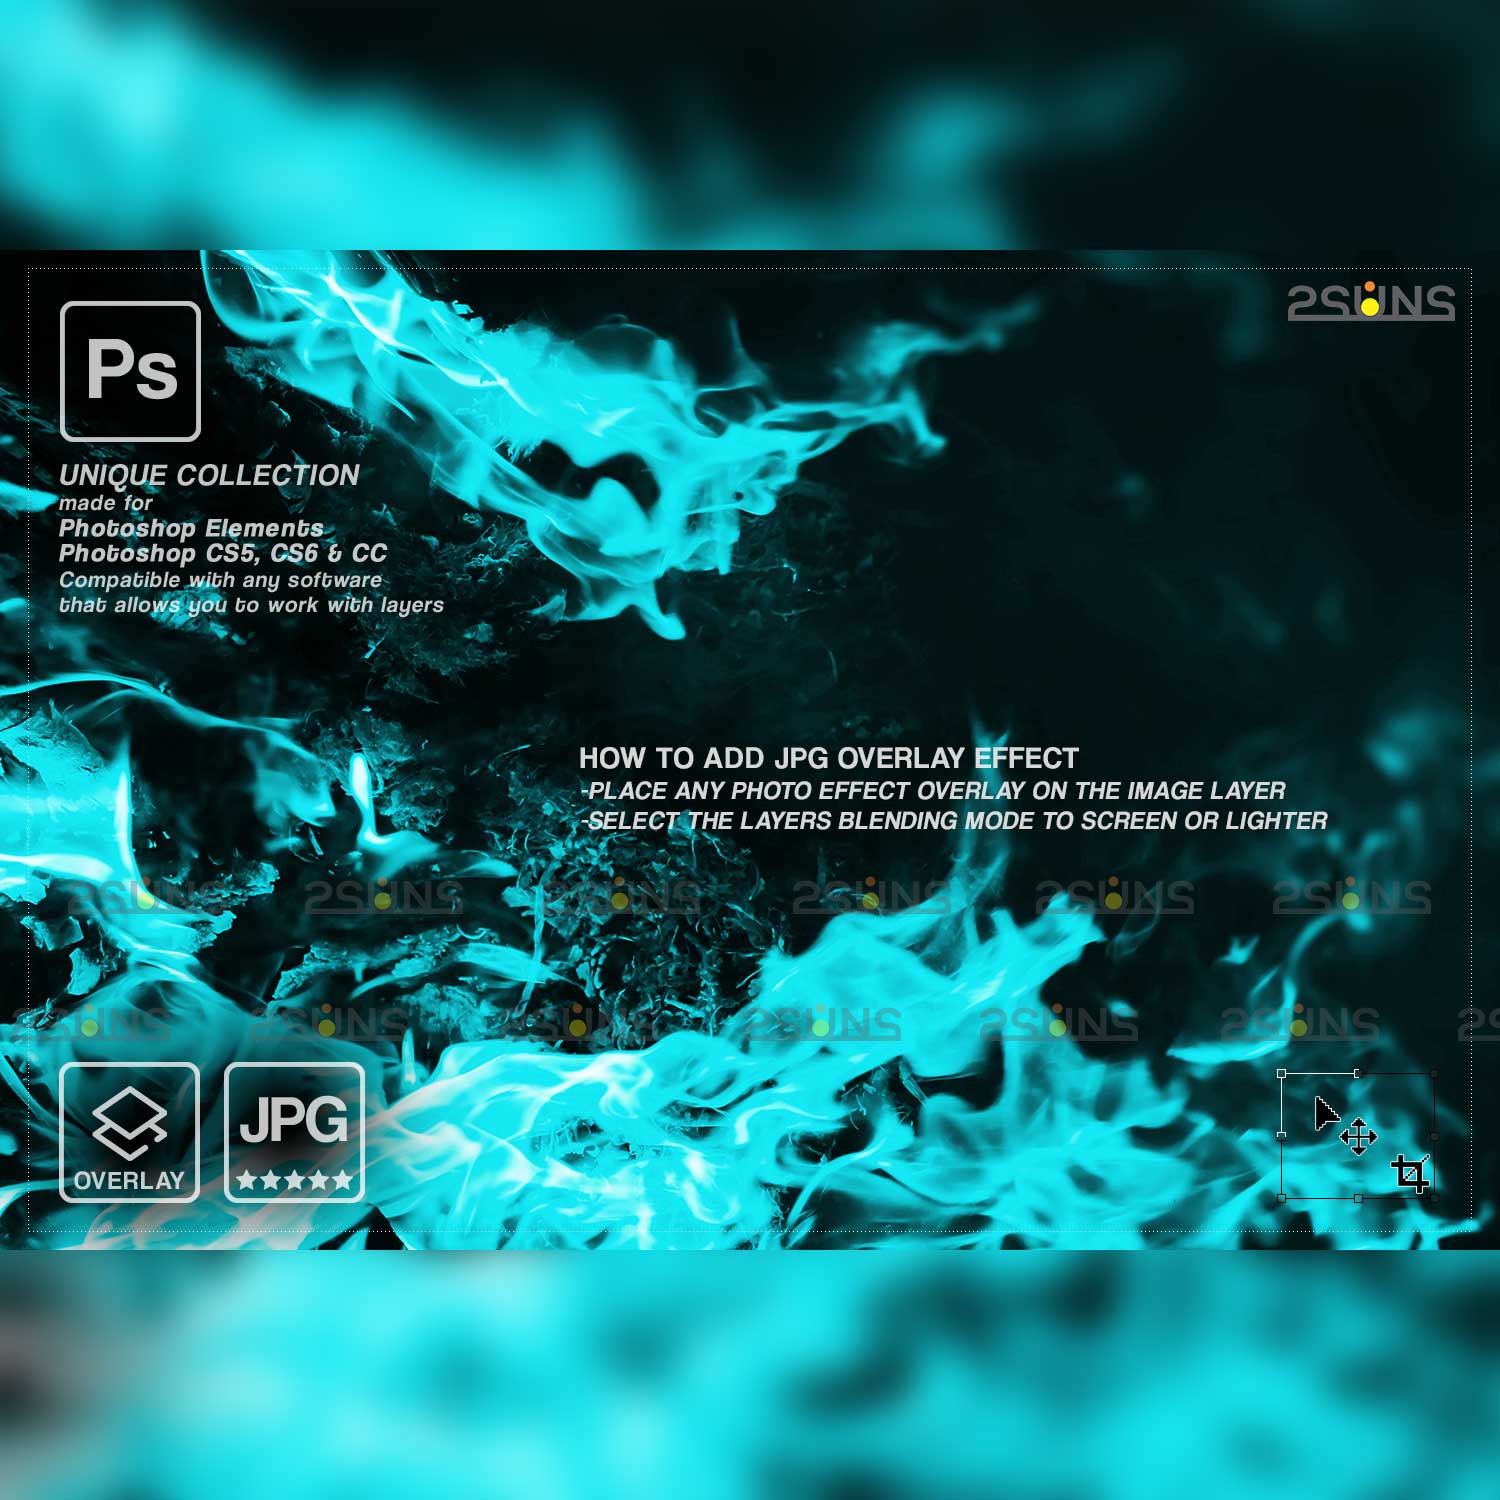 Burn & Neon Fire Backgrounds, Photoshop Overlays cover imagw.